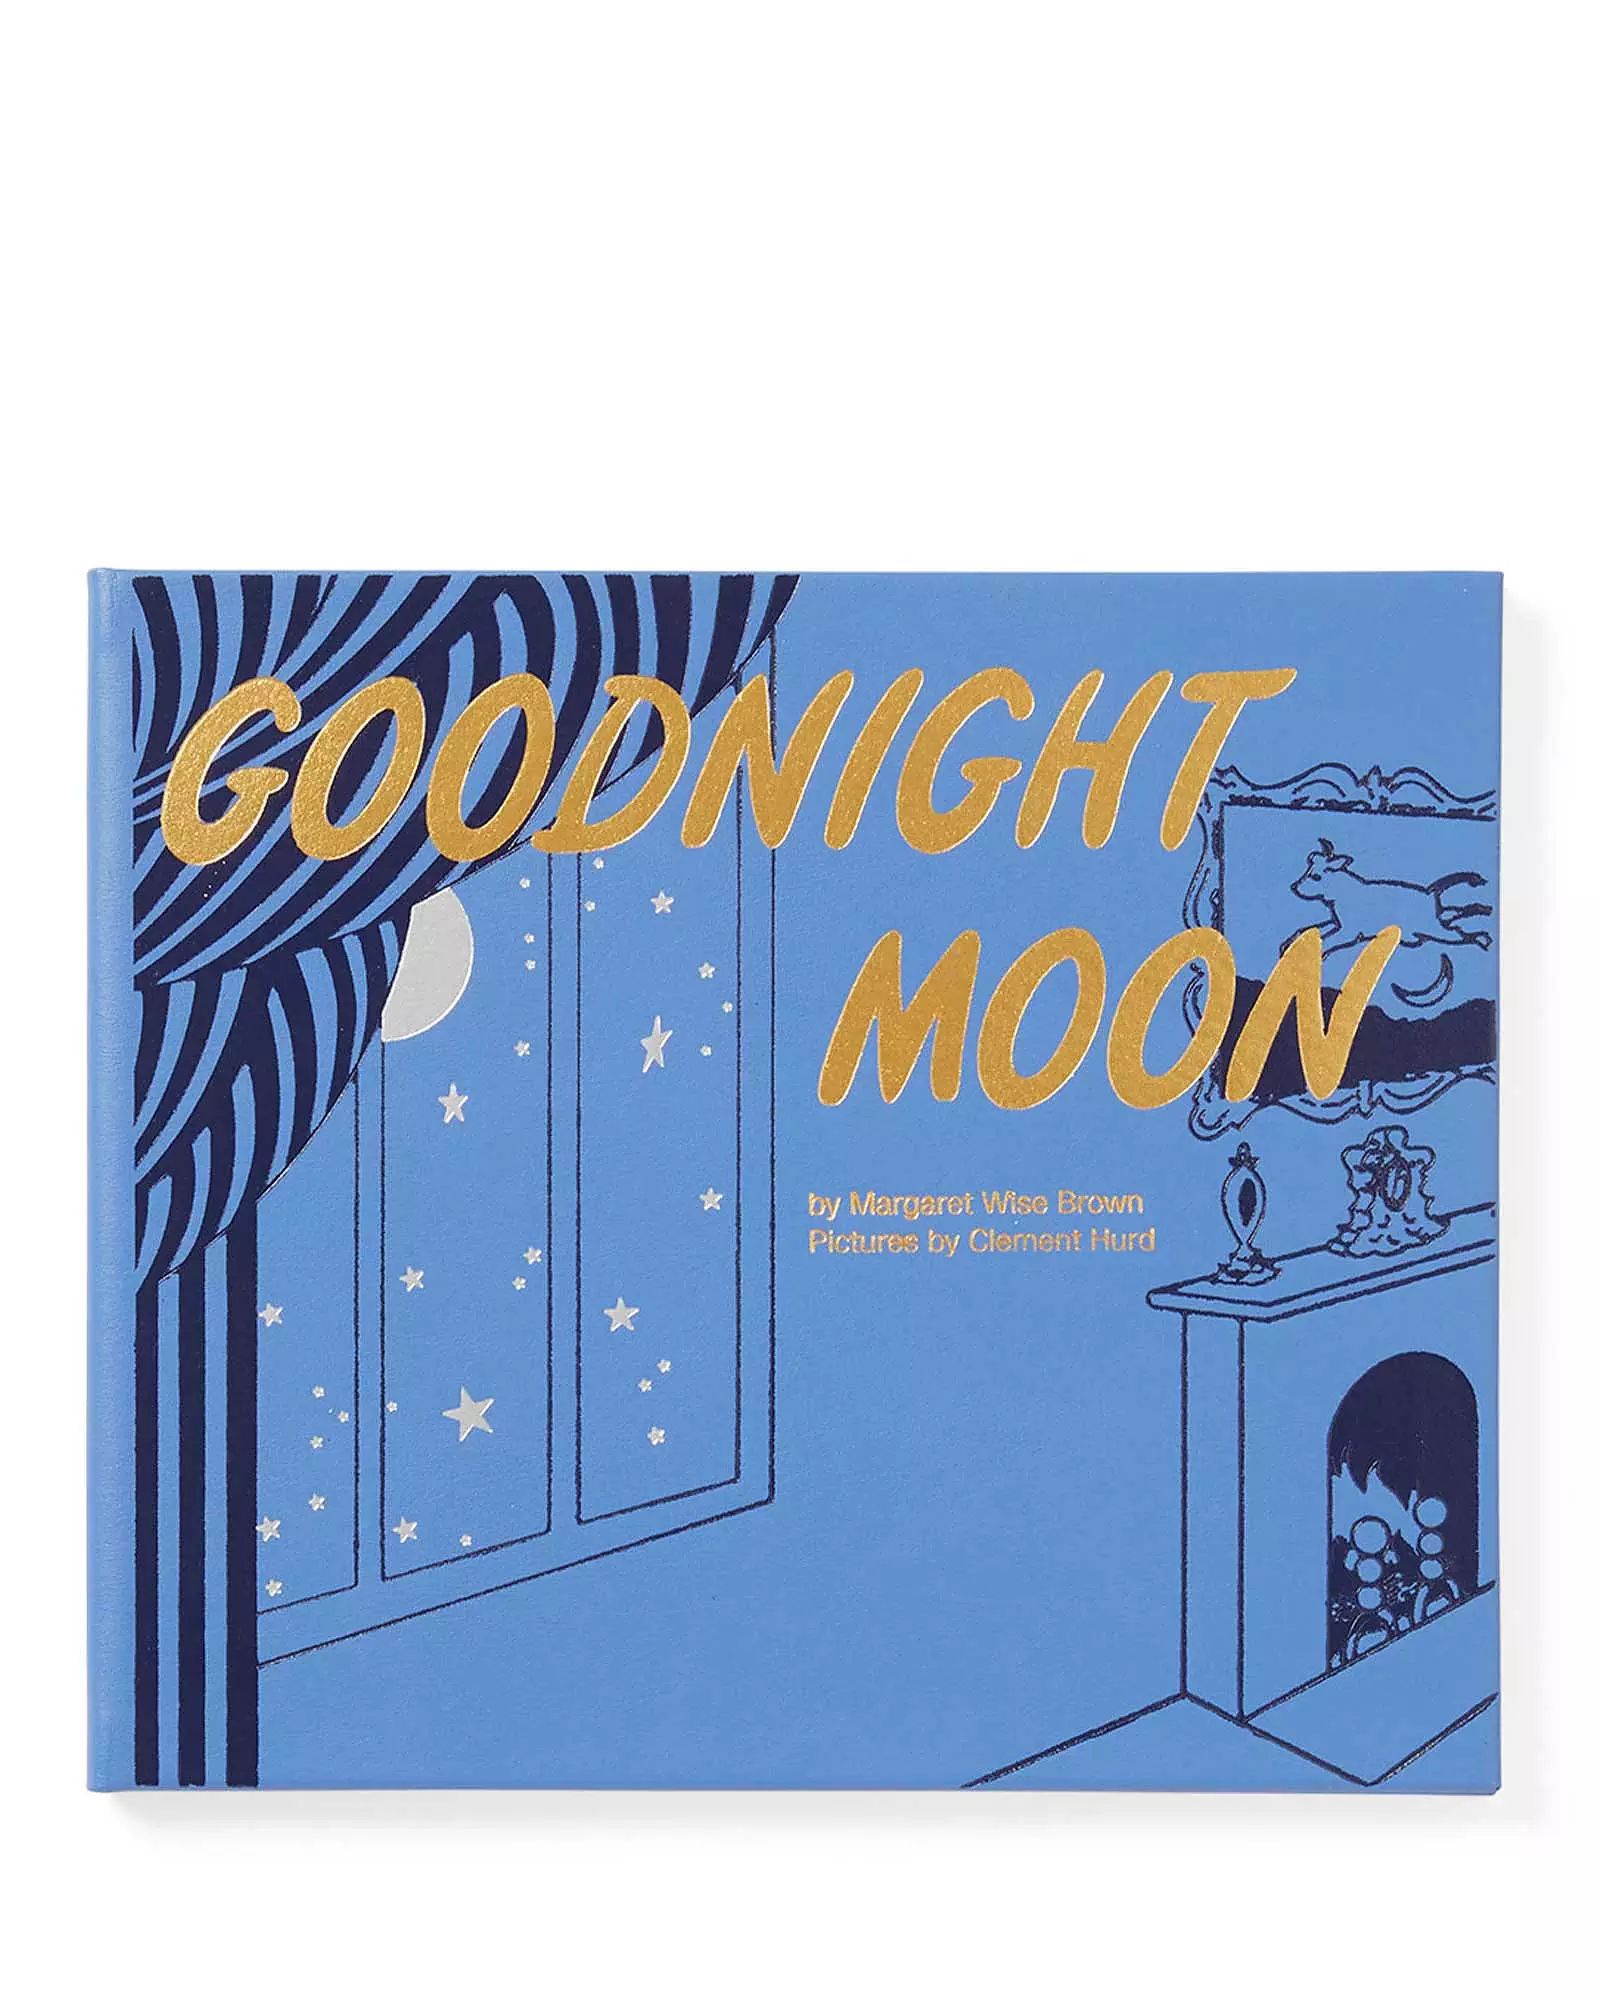 "Goodnight Moon" by Margaret Wise Brown | Serena and Lily